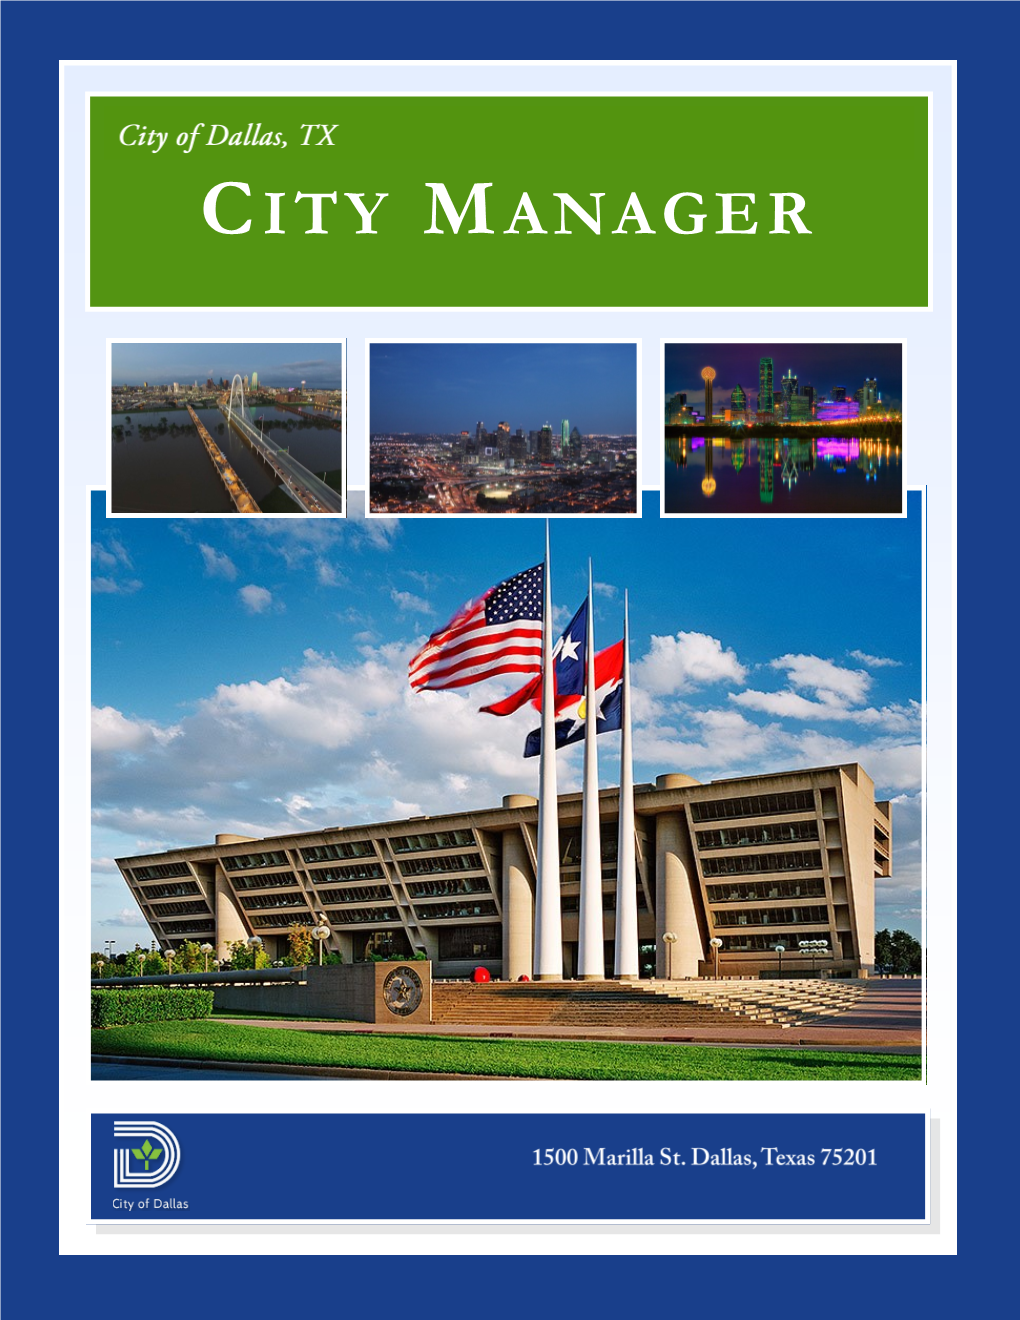 City Manager, Who Has One First Assistant City Manager and Four Assistant City Managers; the Chief Financial Officer Also Reports Directly to the City Manager